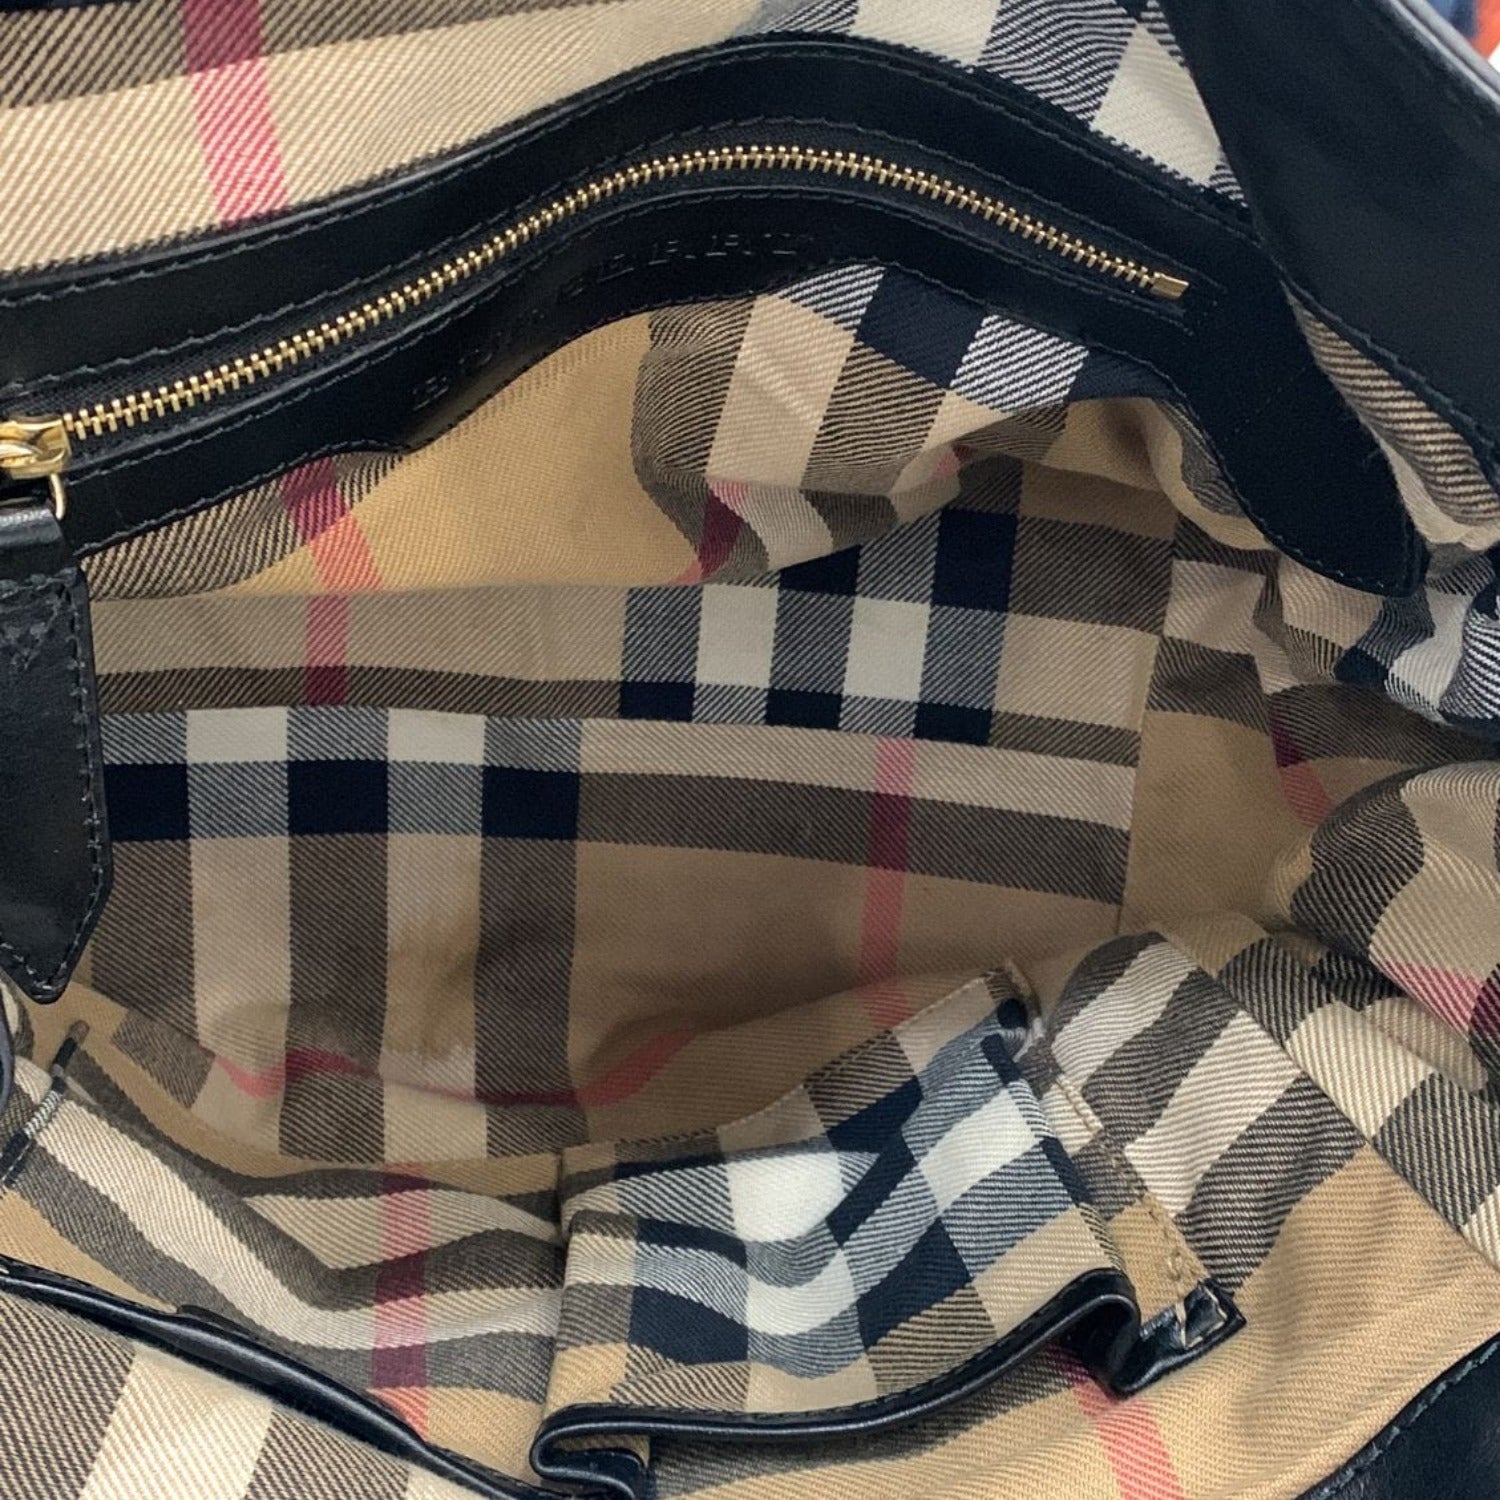 Burberry Bridle House Lynher Tote